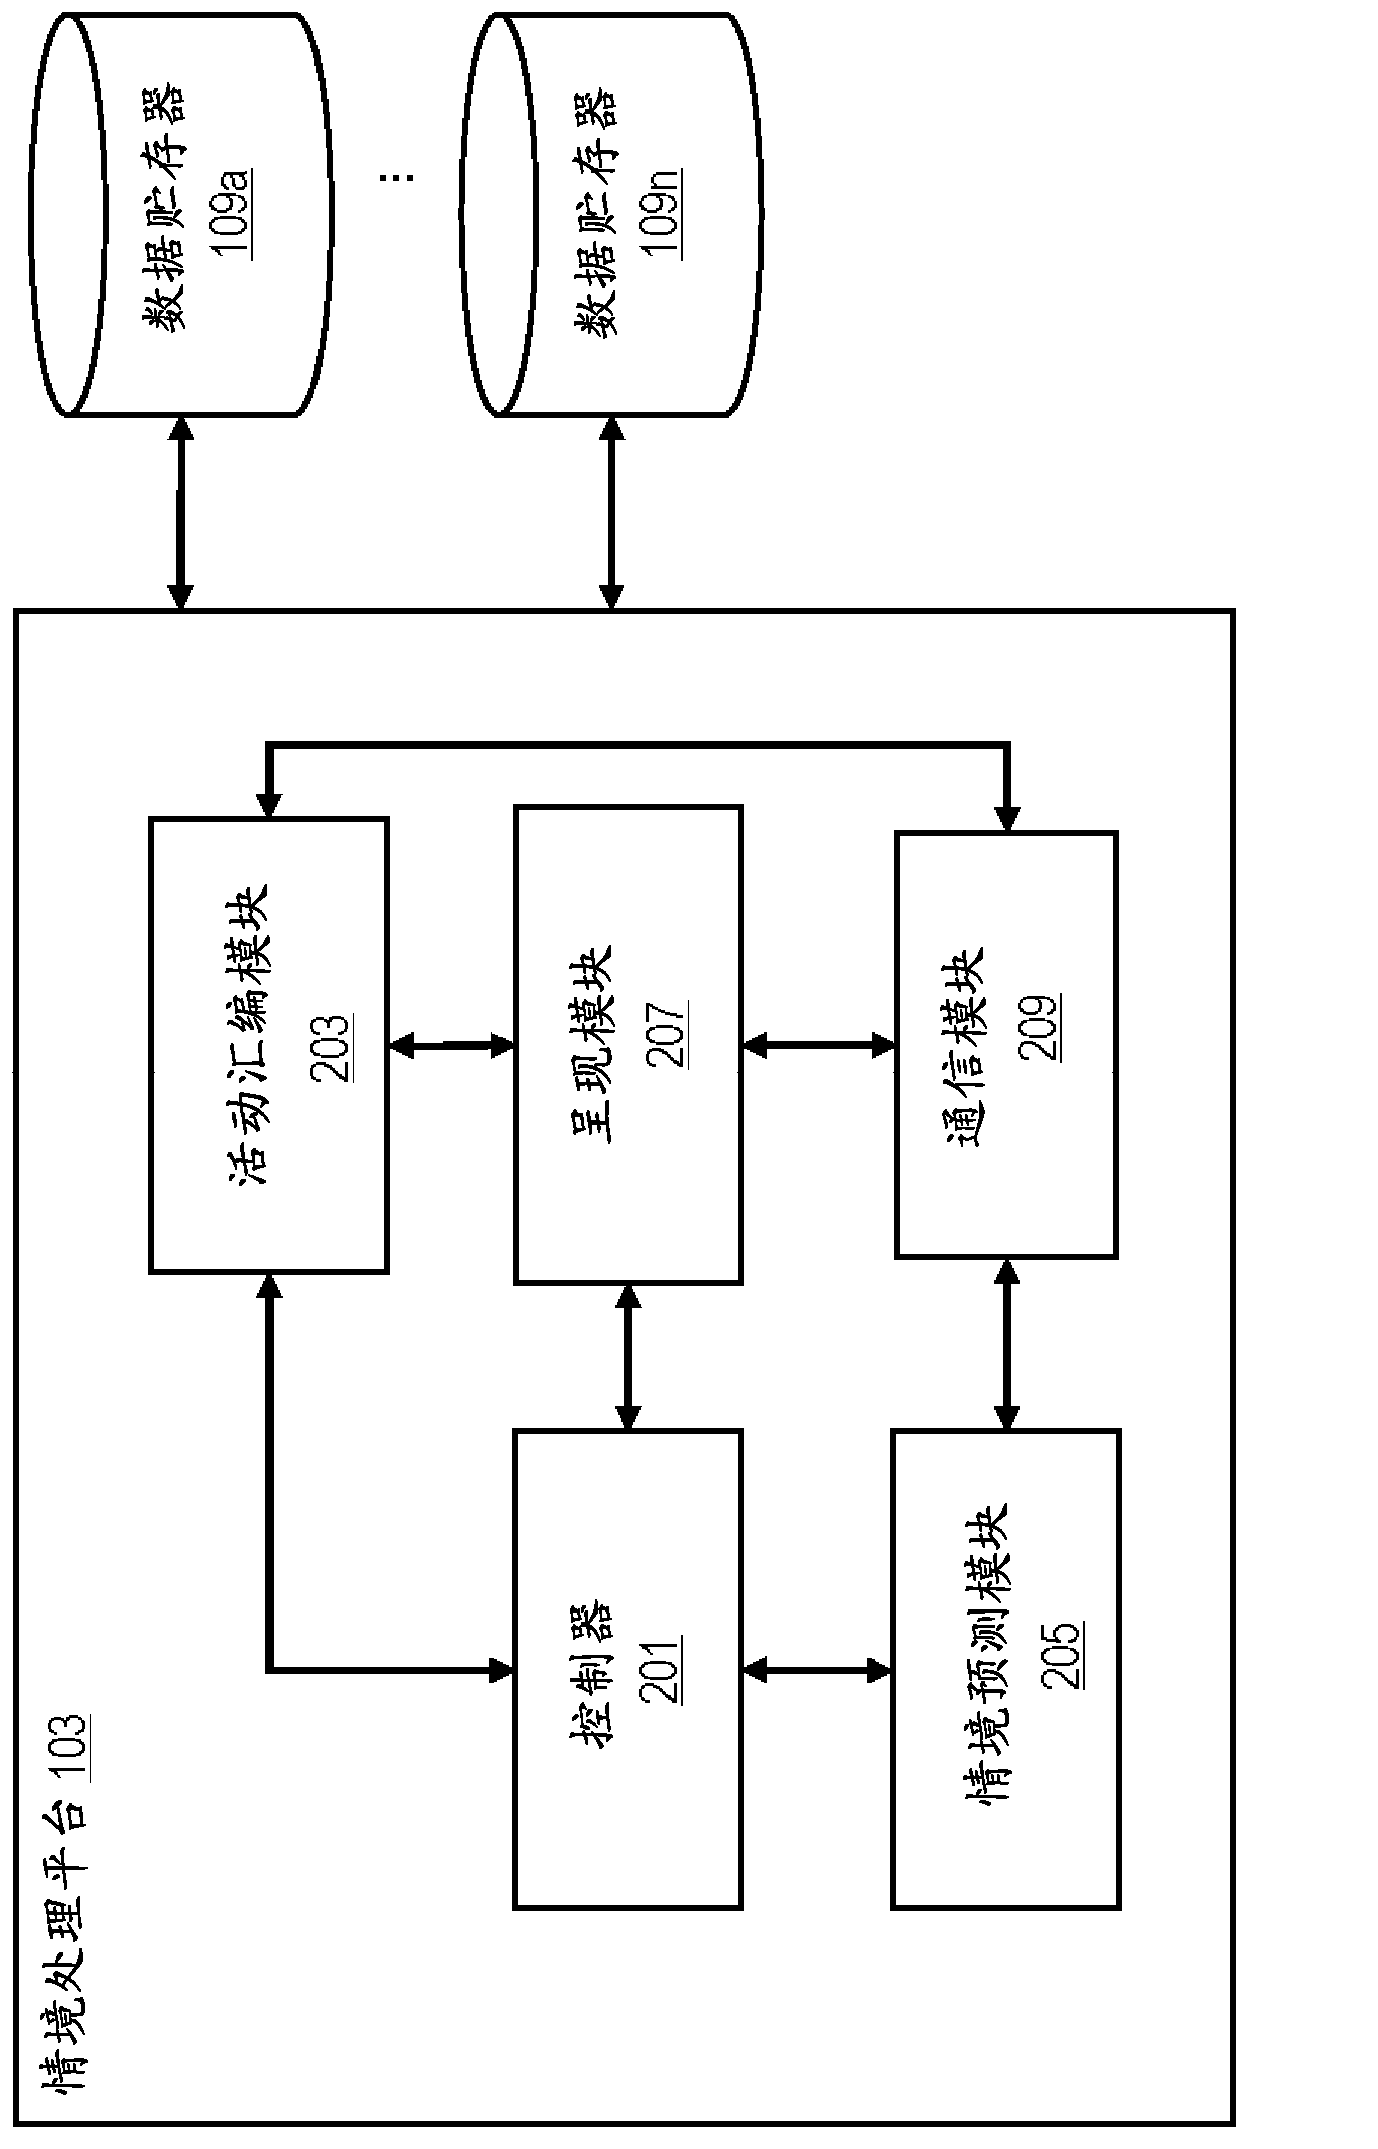 Method and apparatus for executing device actions based on context awareness